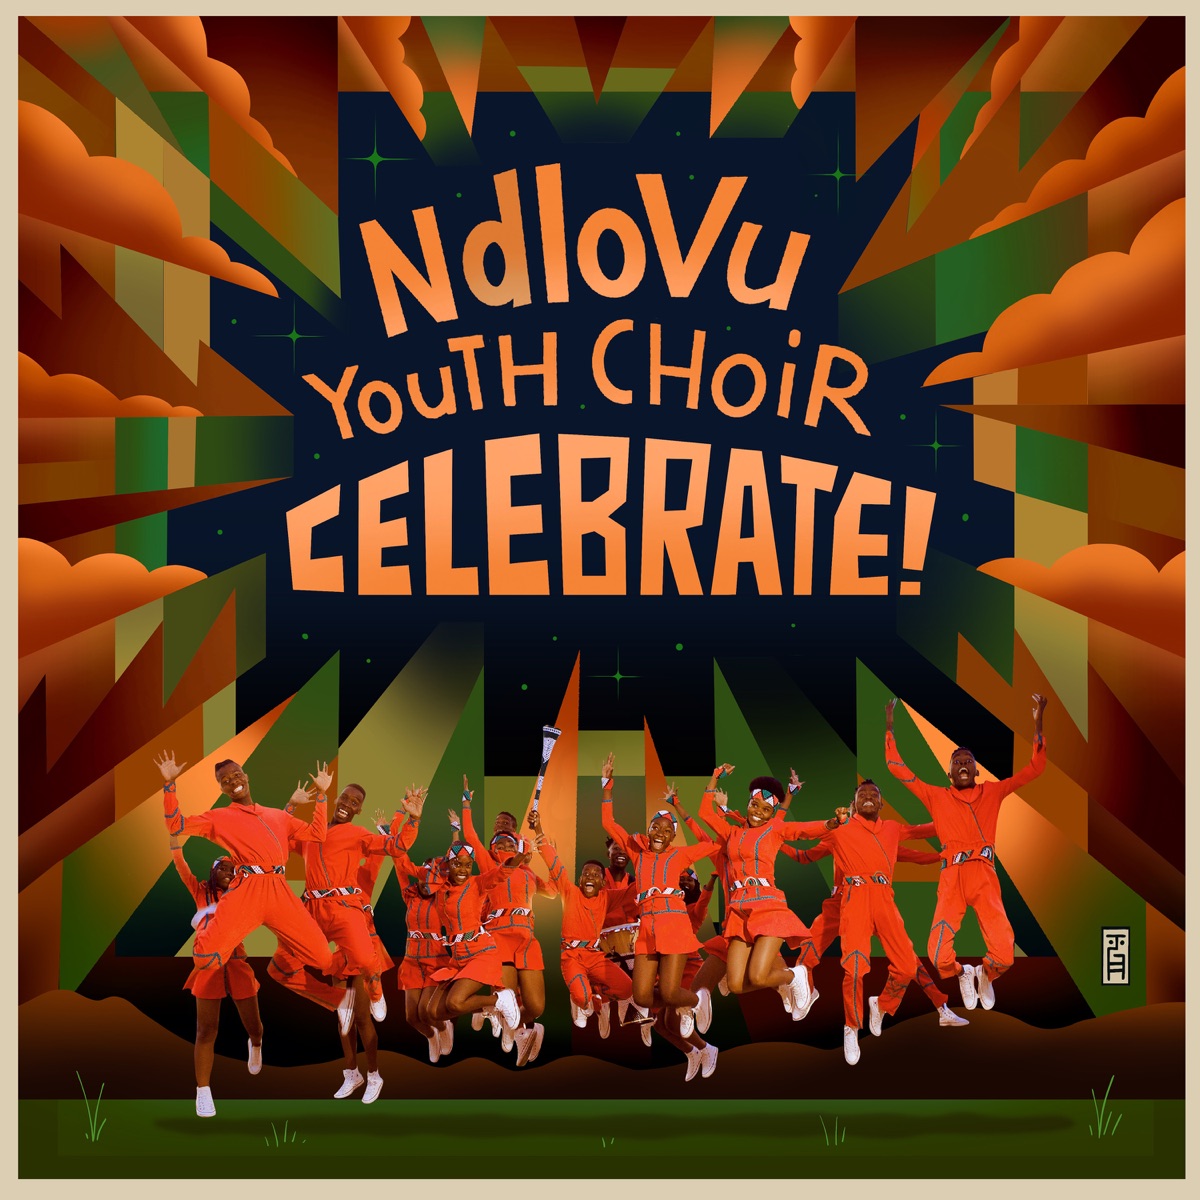 MP3: Ndlovu Youth Choir – Diamonds On The Soles Of Her Shoes